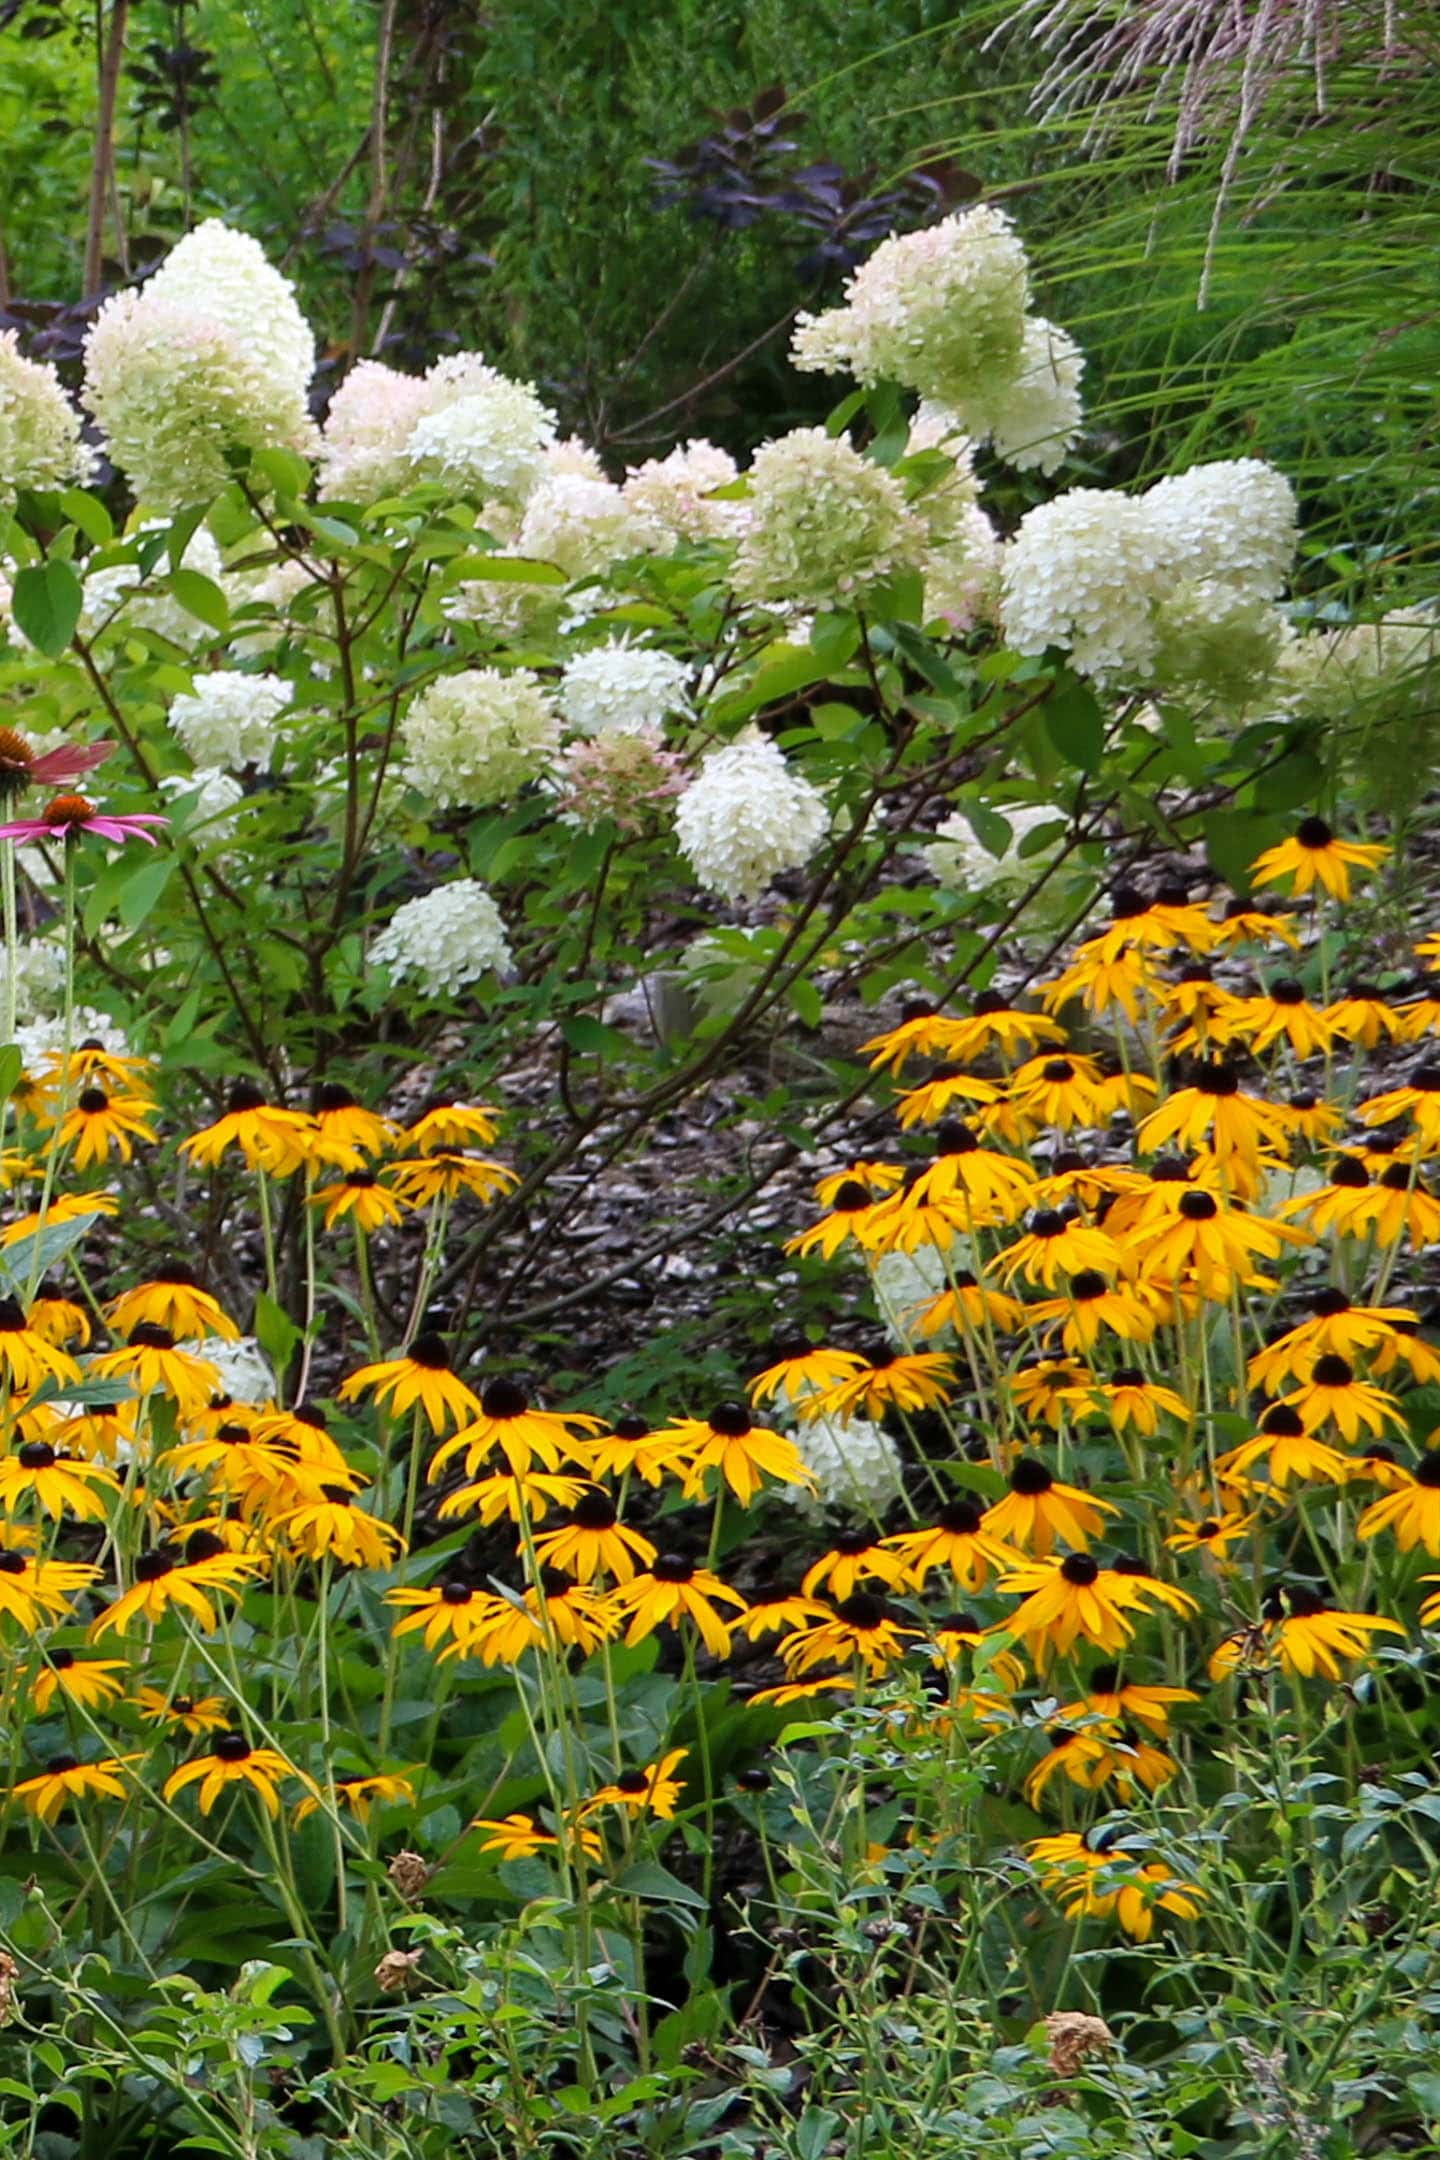 Black-eyed Susan growing in front of a white Panicle Hydrangea